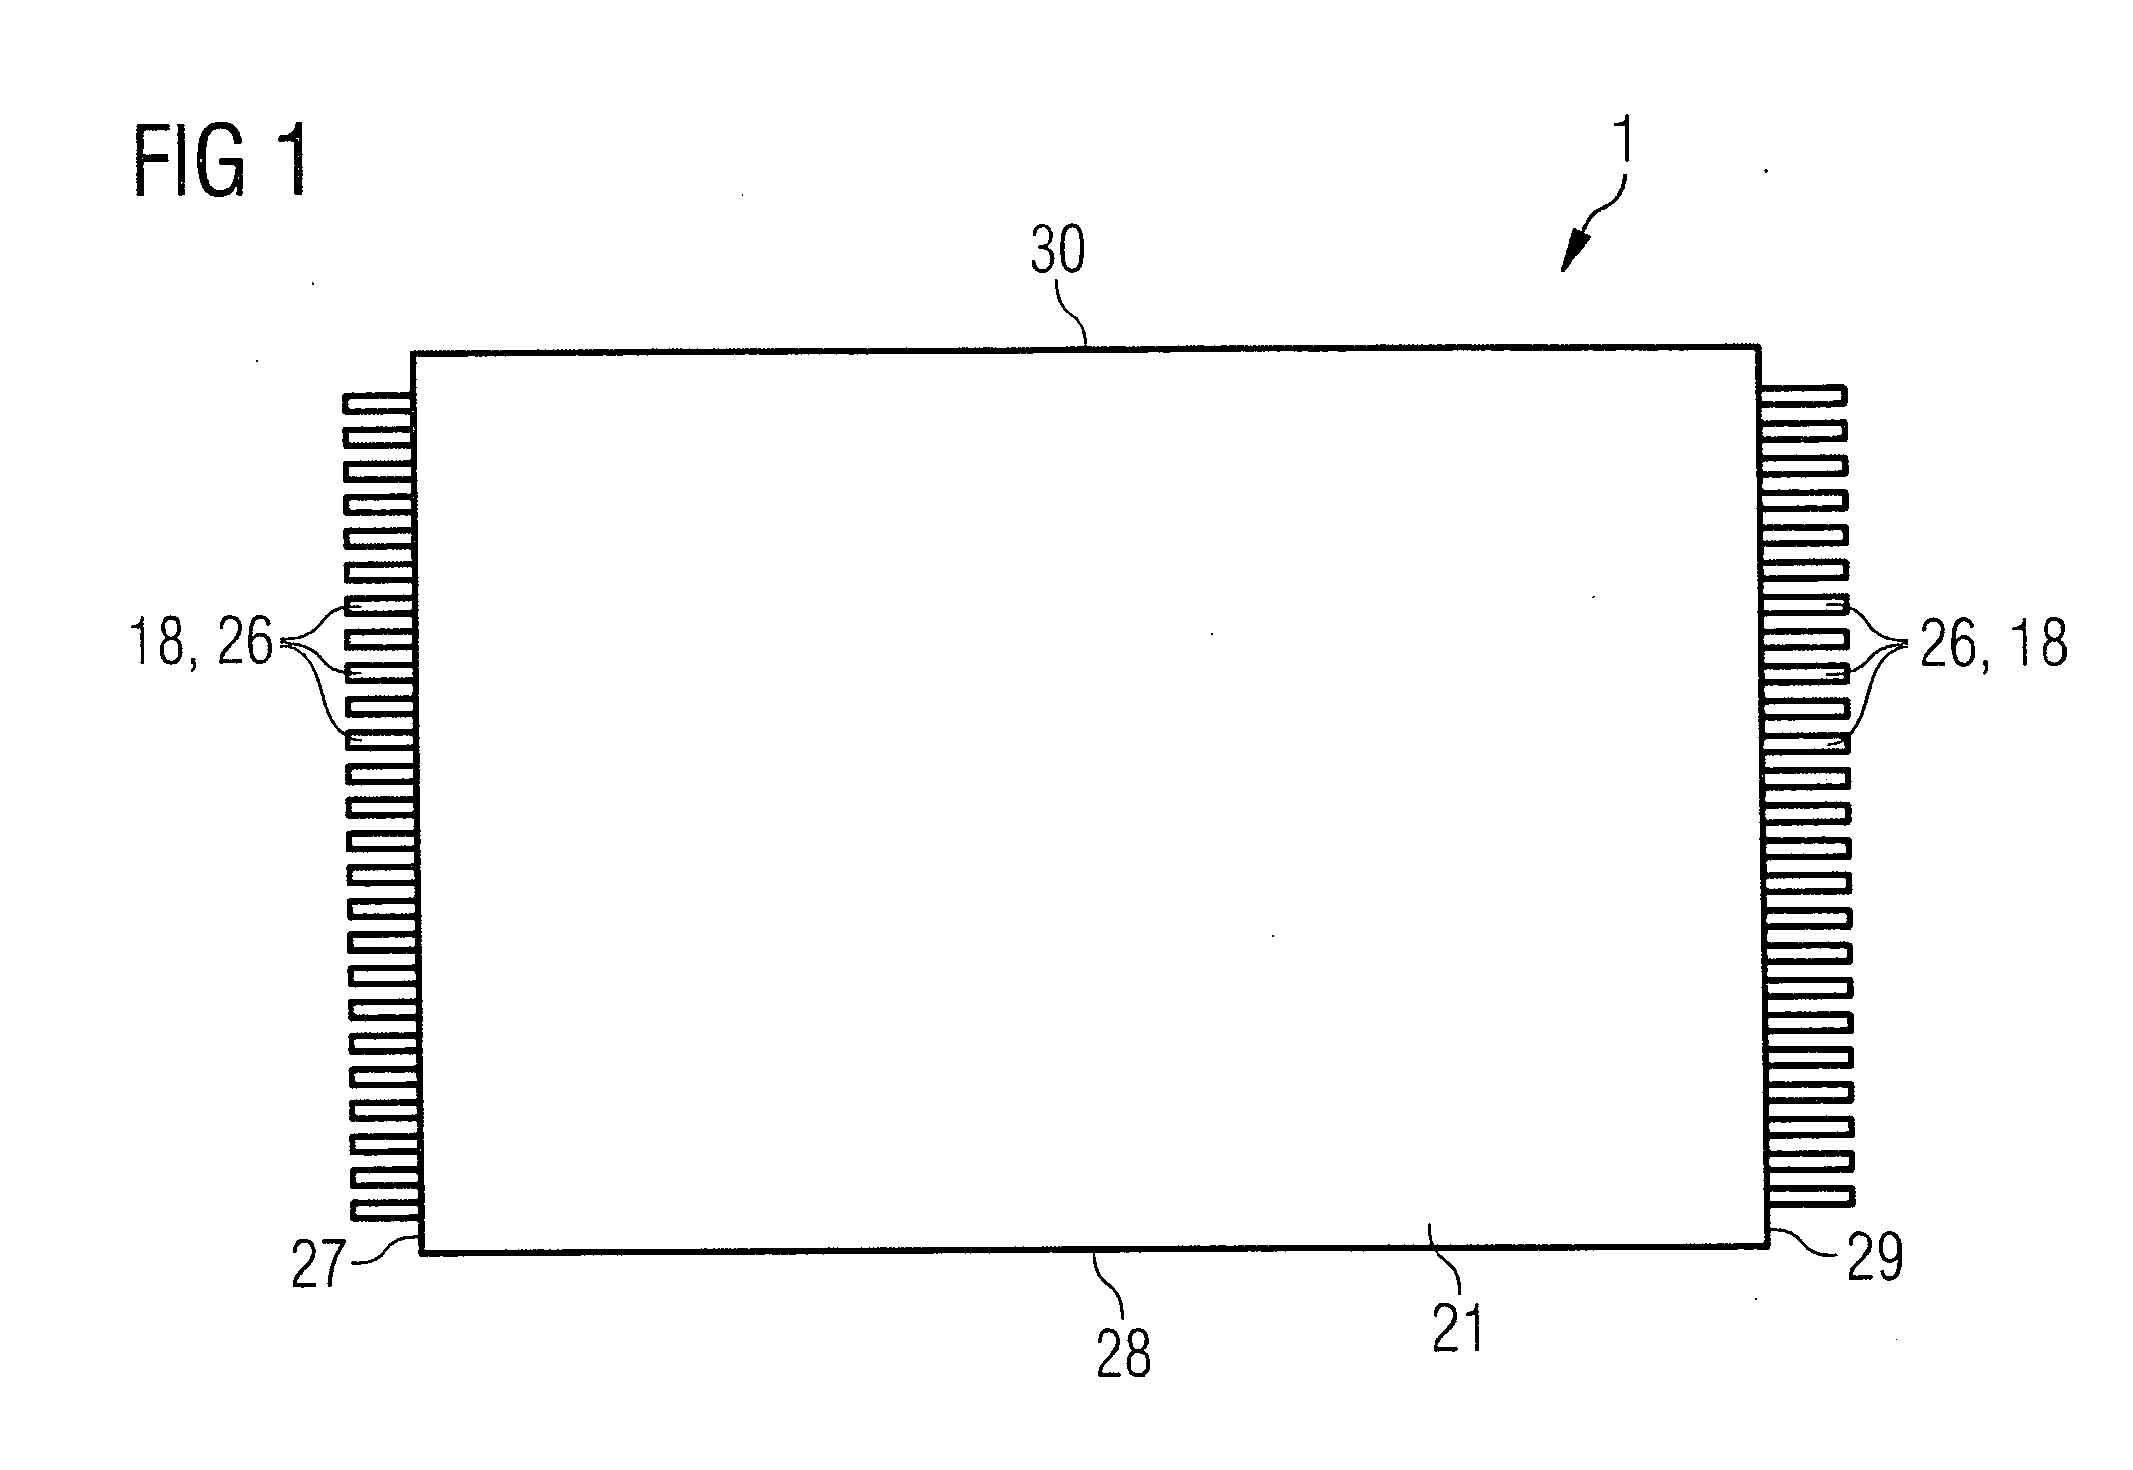 Semiconductor package based on lead-on-chip architecture, the fabrication thereof and a leadframe for implementing in a semiconductor package